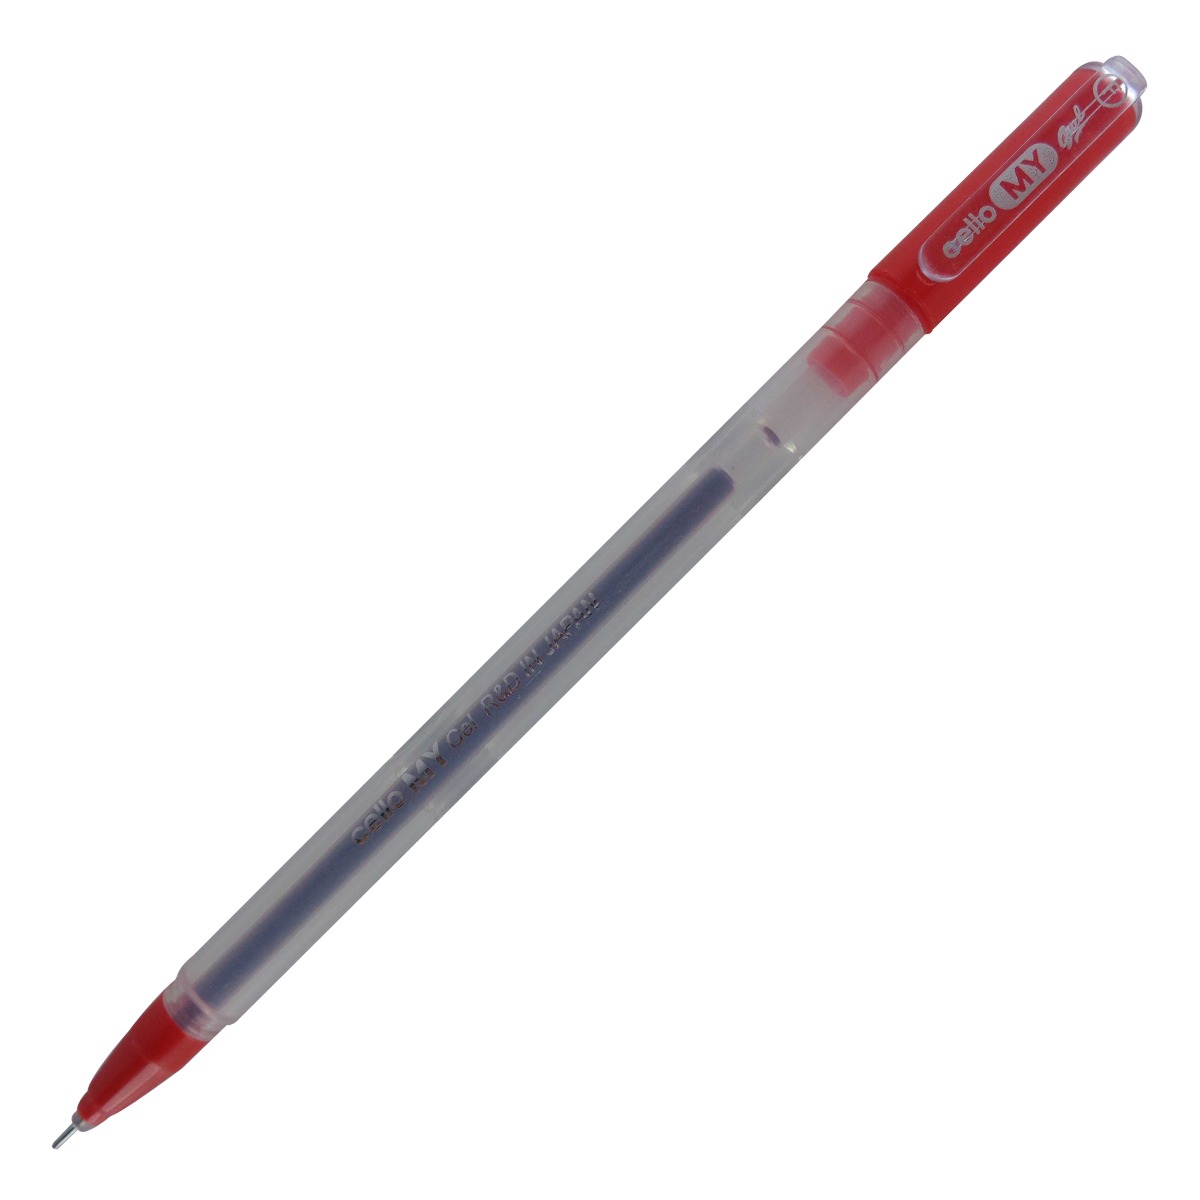 Cello Model: 14892 My Gel Transparent body with red color cap Red ink  fine tip cap type gel pen